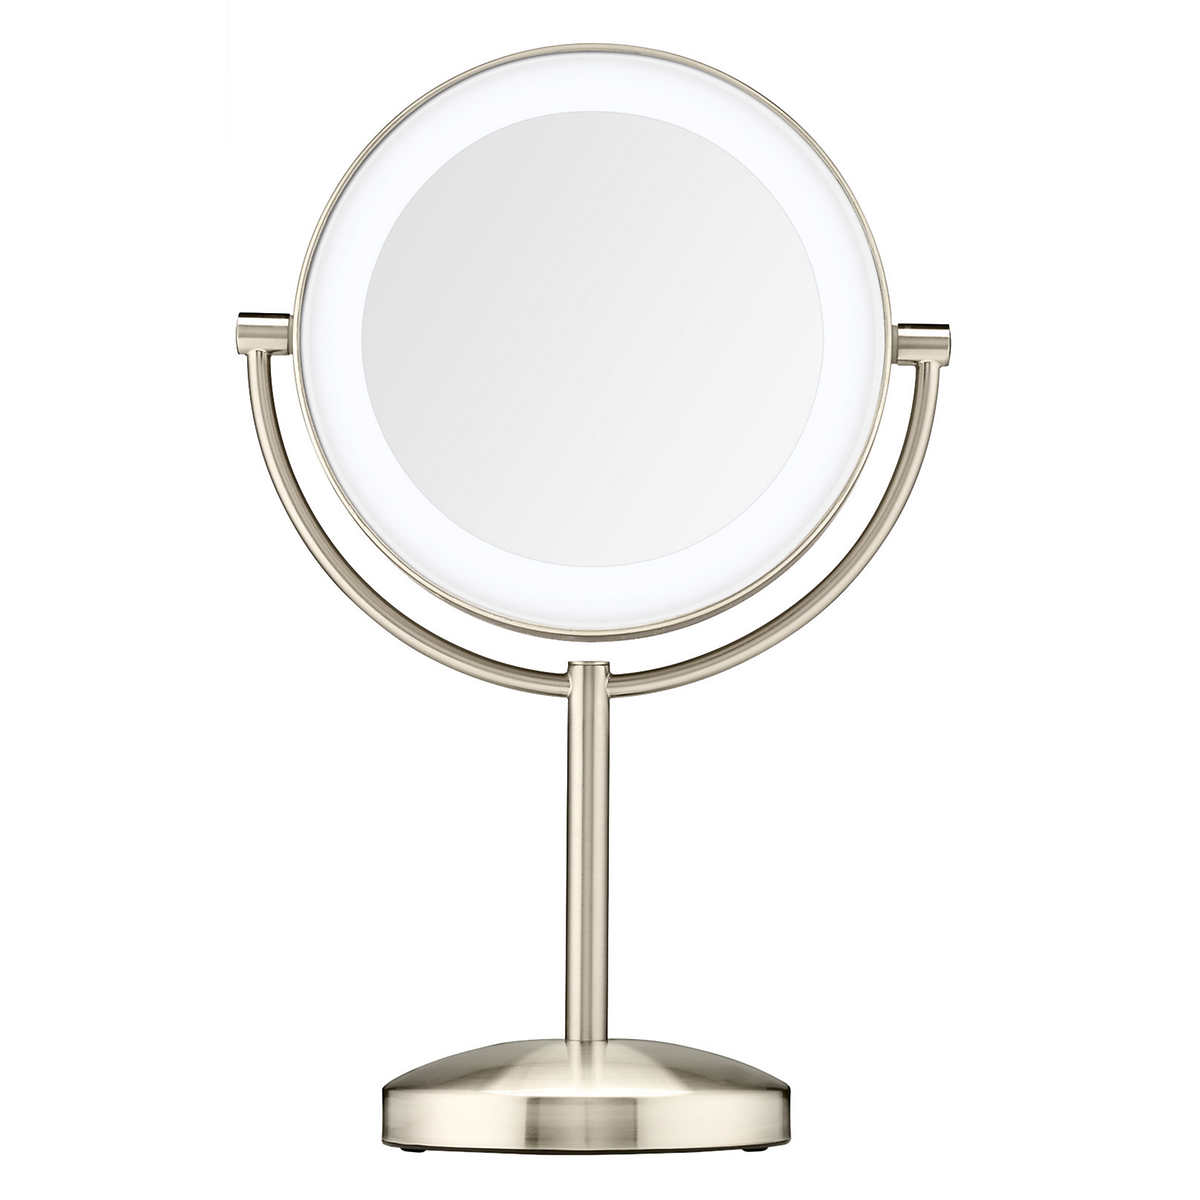 Reflections Led Lighted Mirror By, Conair Makeup Mirror With Light Settings